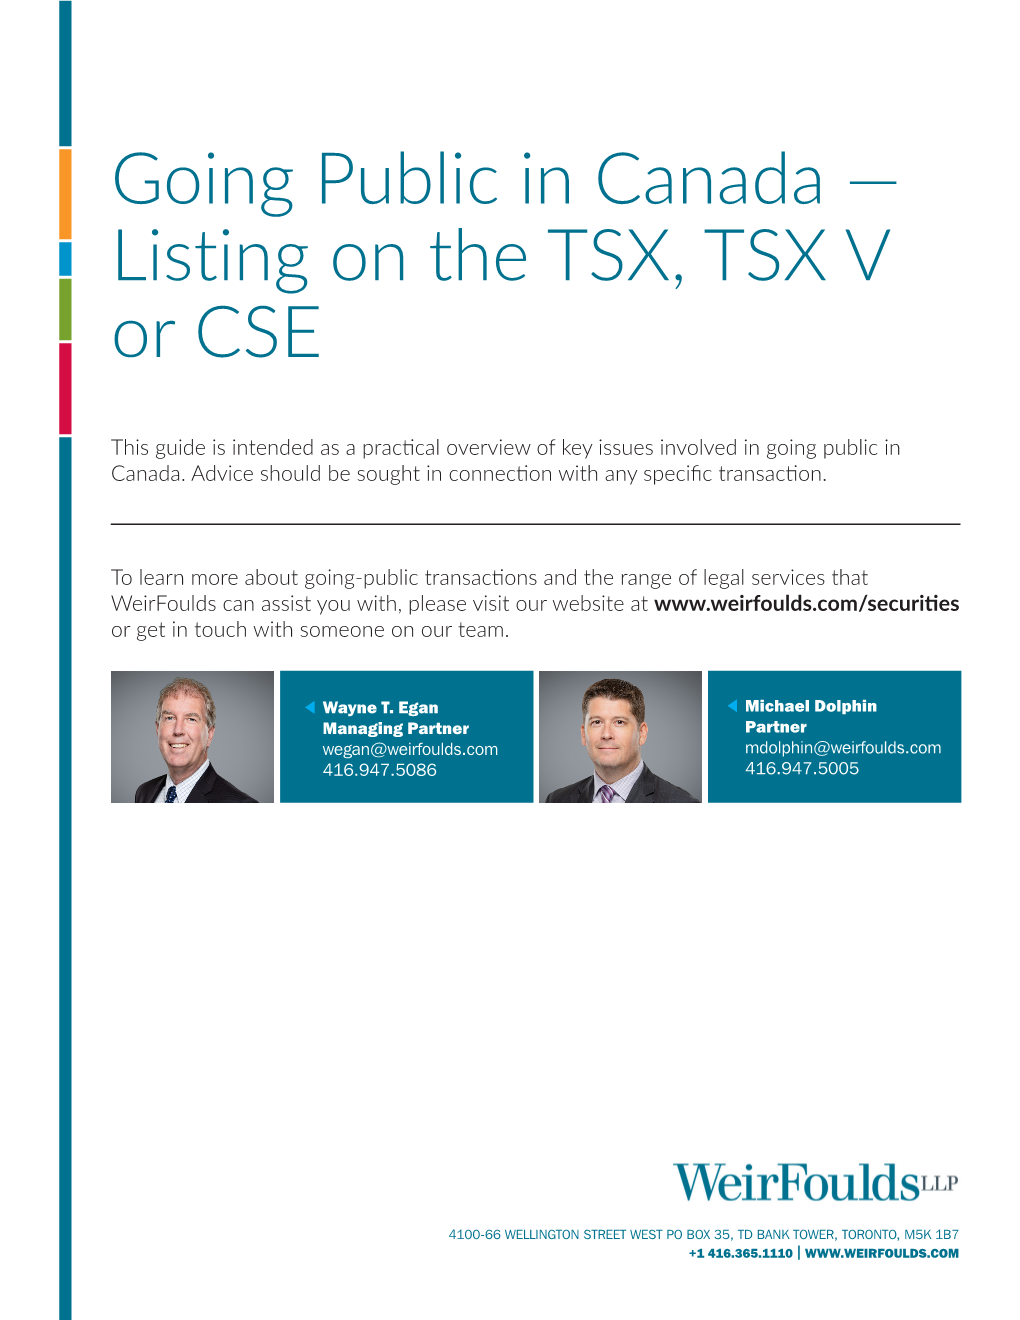 Going Public in Canada — Listing on the TSX, TSX V Or CSE